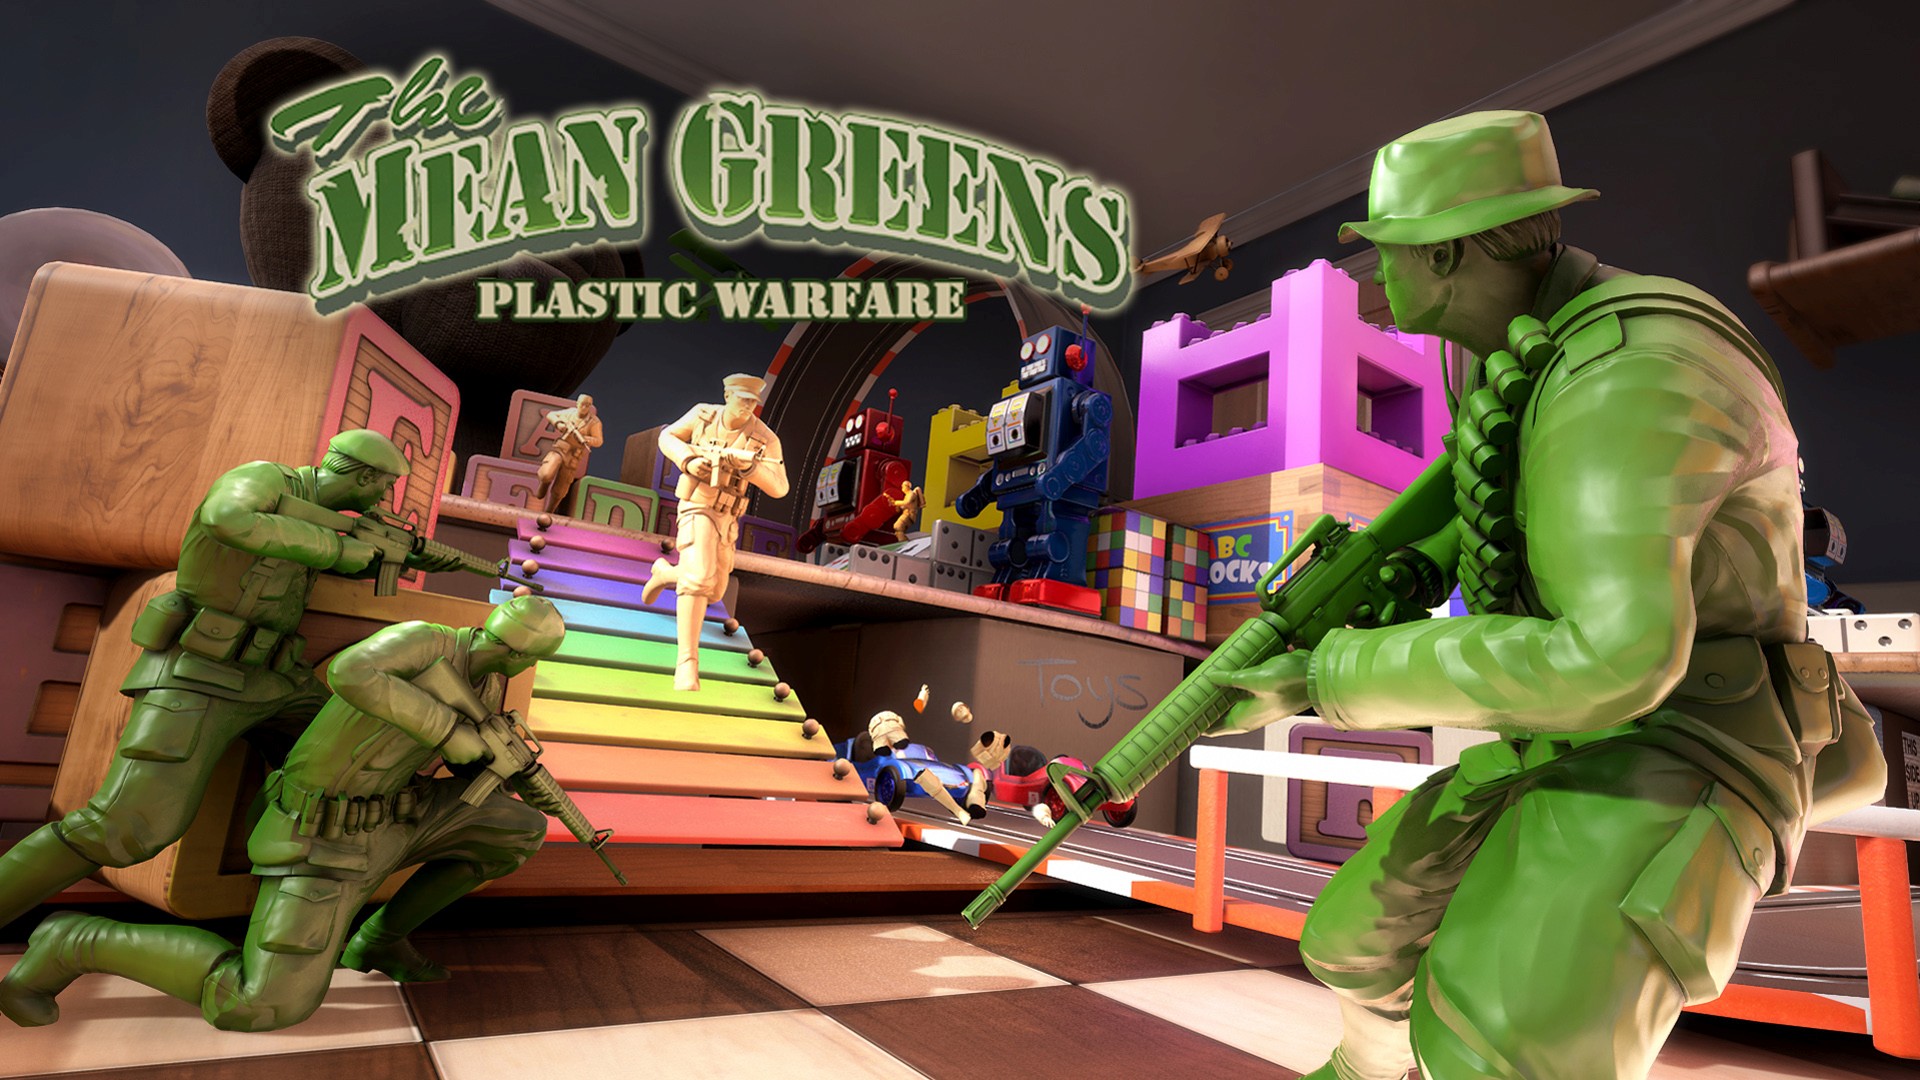 Video For Join the Fight: The Mean Greens – Plastic Warfare is Available Today on Xbox One